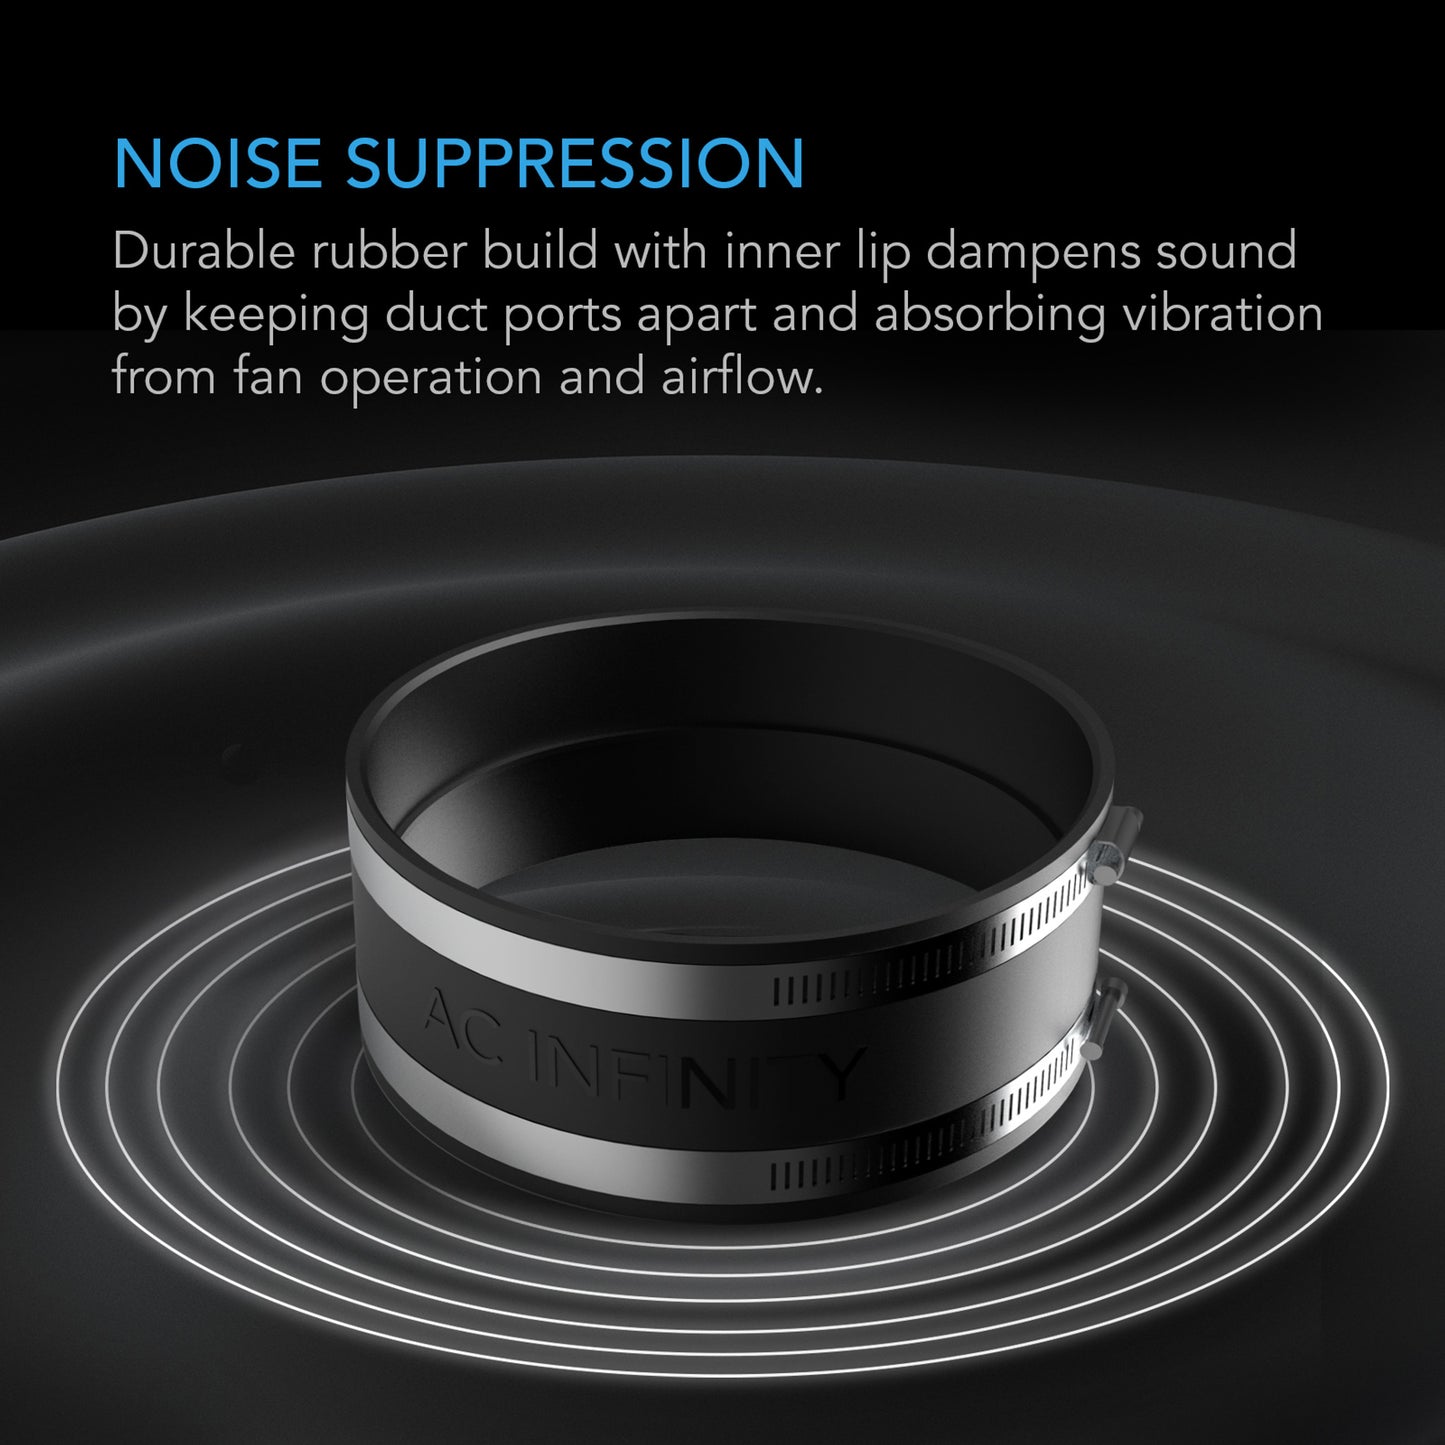 AC Infinity Noise Reduction Clamps